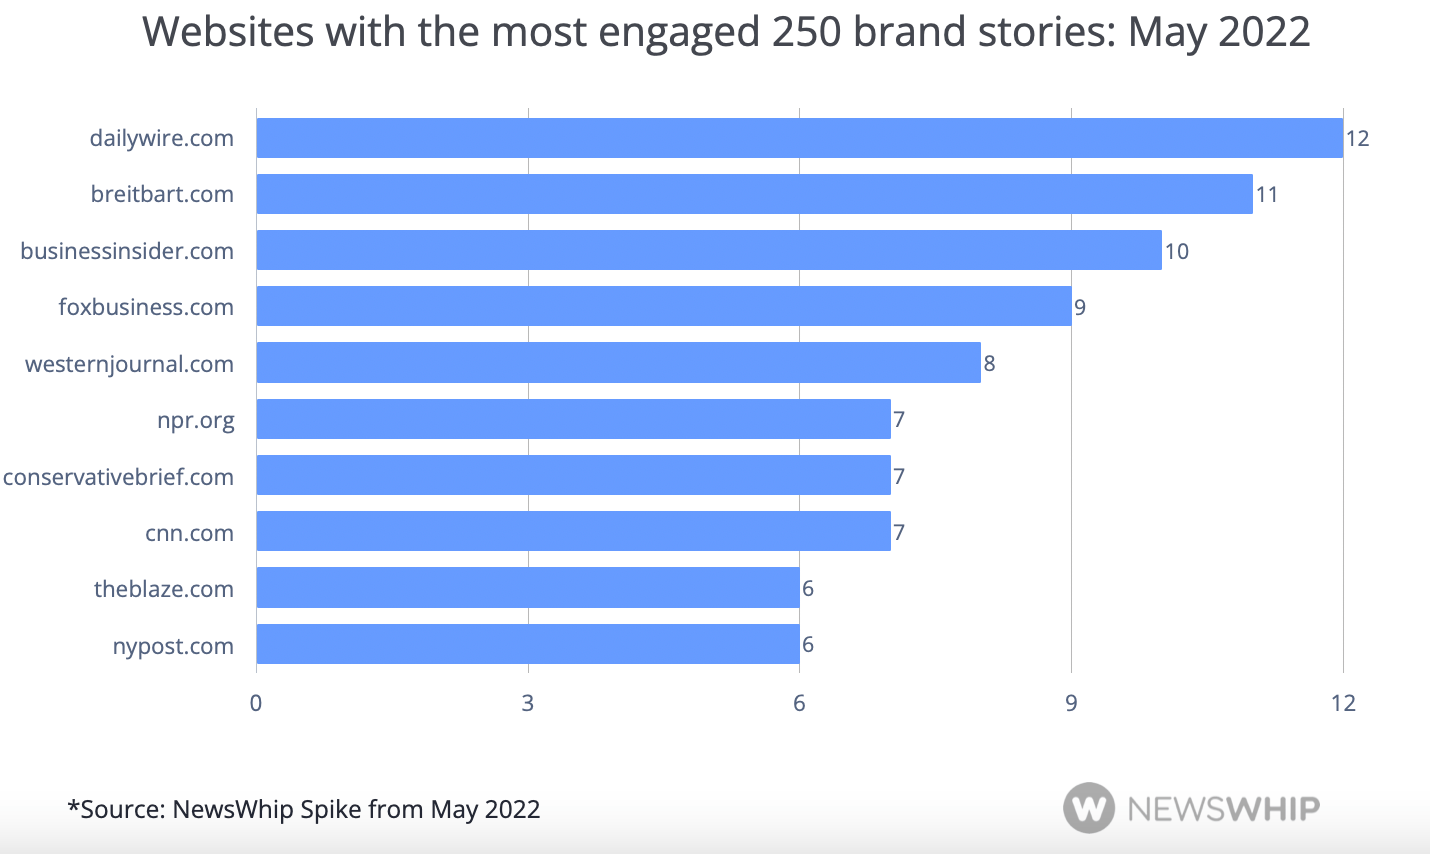 Chart showing the most frequently appearing publishers for the top 250 brand stories in May 2022